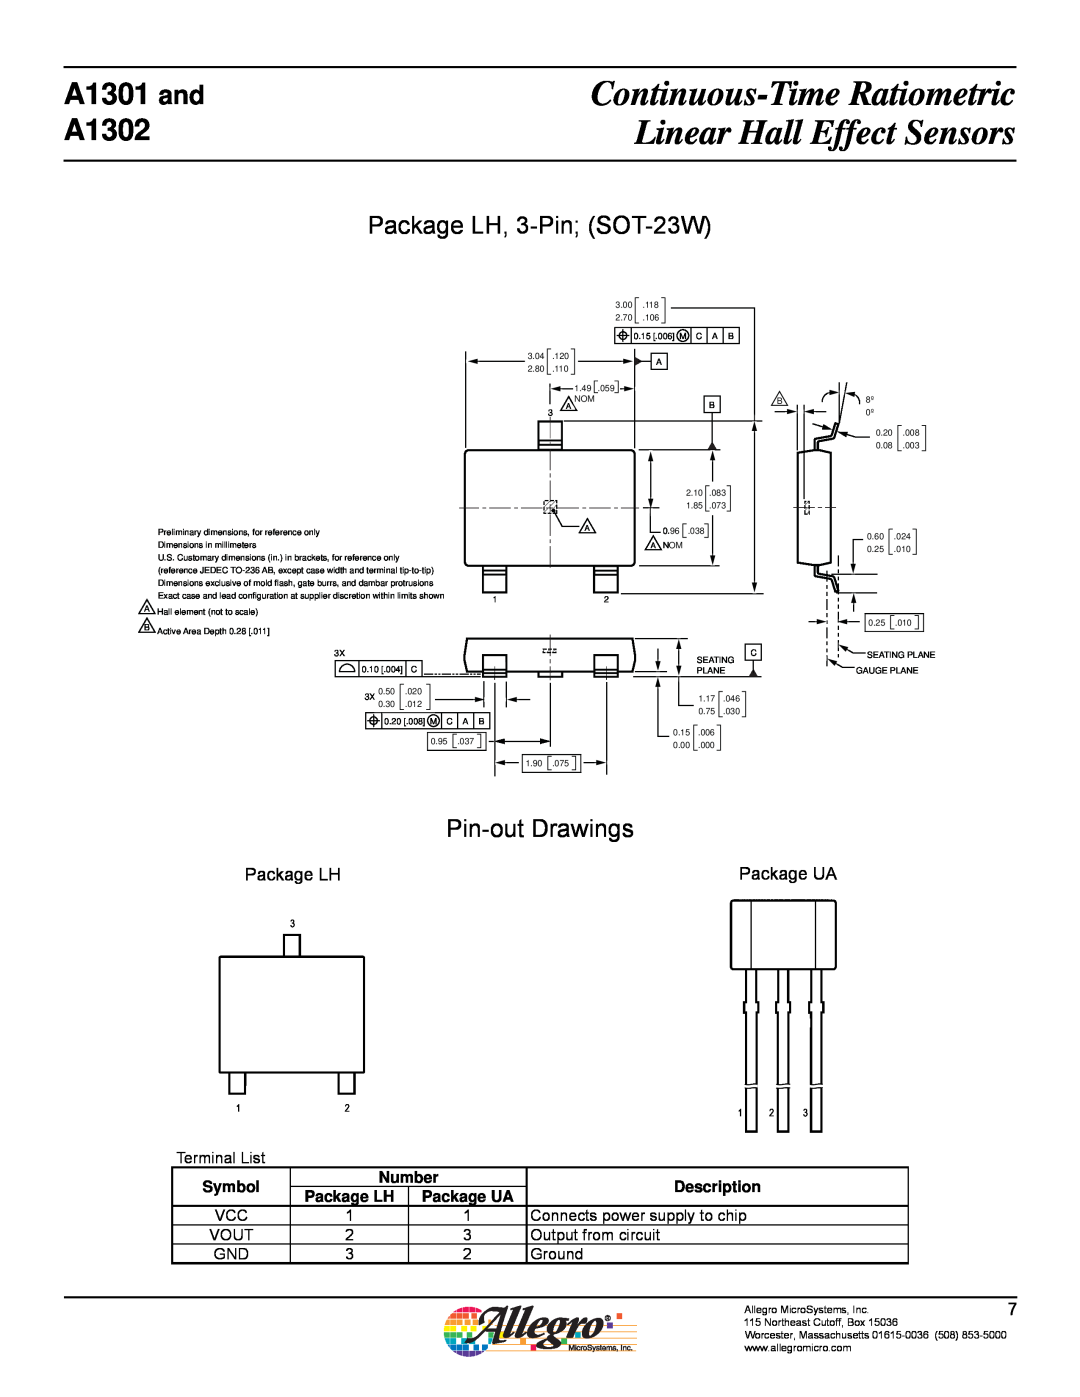 Allegro Multimedia manual Package LH, 3-Pin SOT-23W, Pin-out Drawings, A1301 and A1302, Package UA 